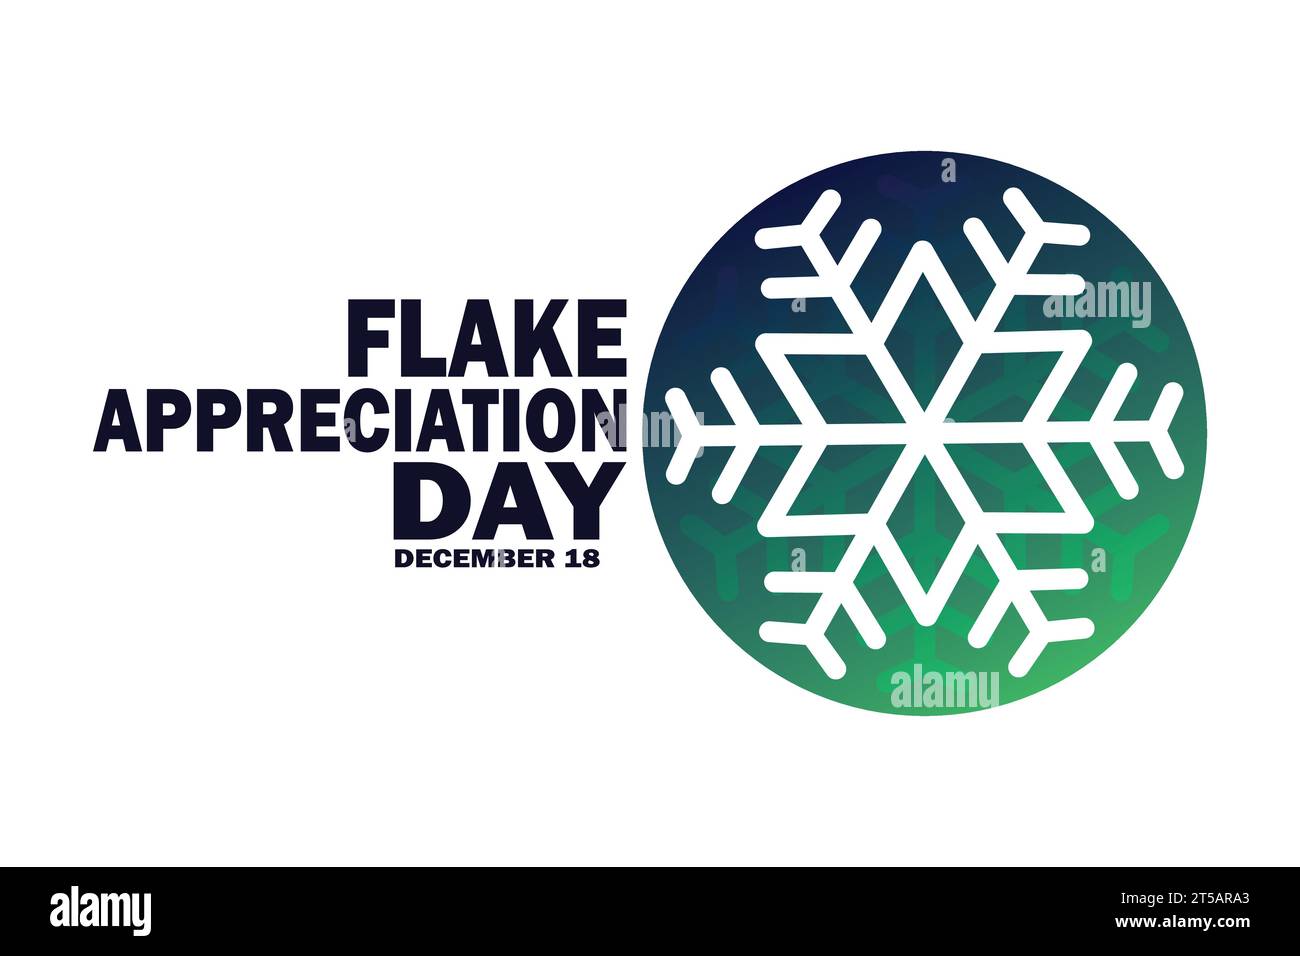 Flake Appreciation Day. December 18. Holiday concept. Template for background, banner, card, poster with text inscription. Vector illustration Stock Vector